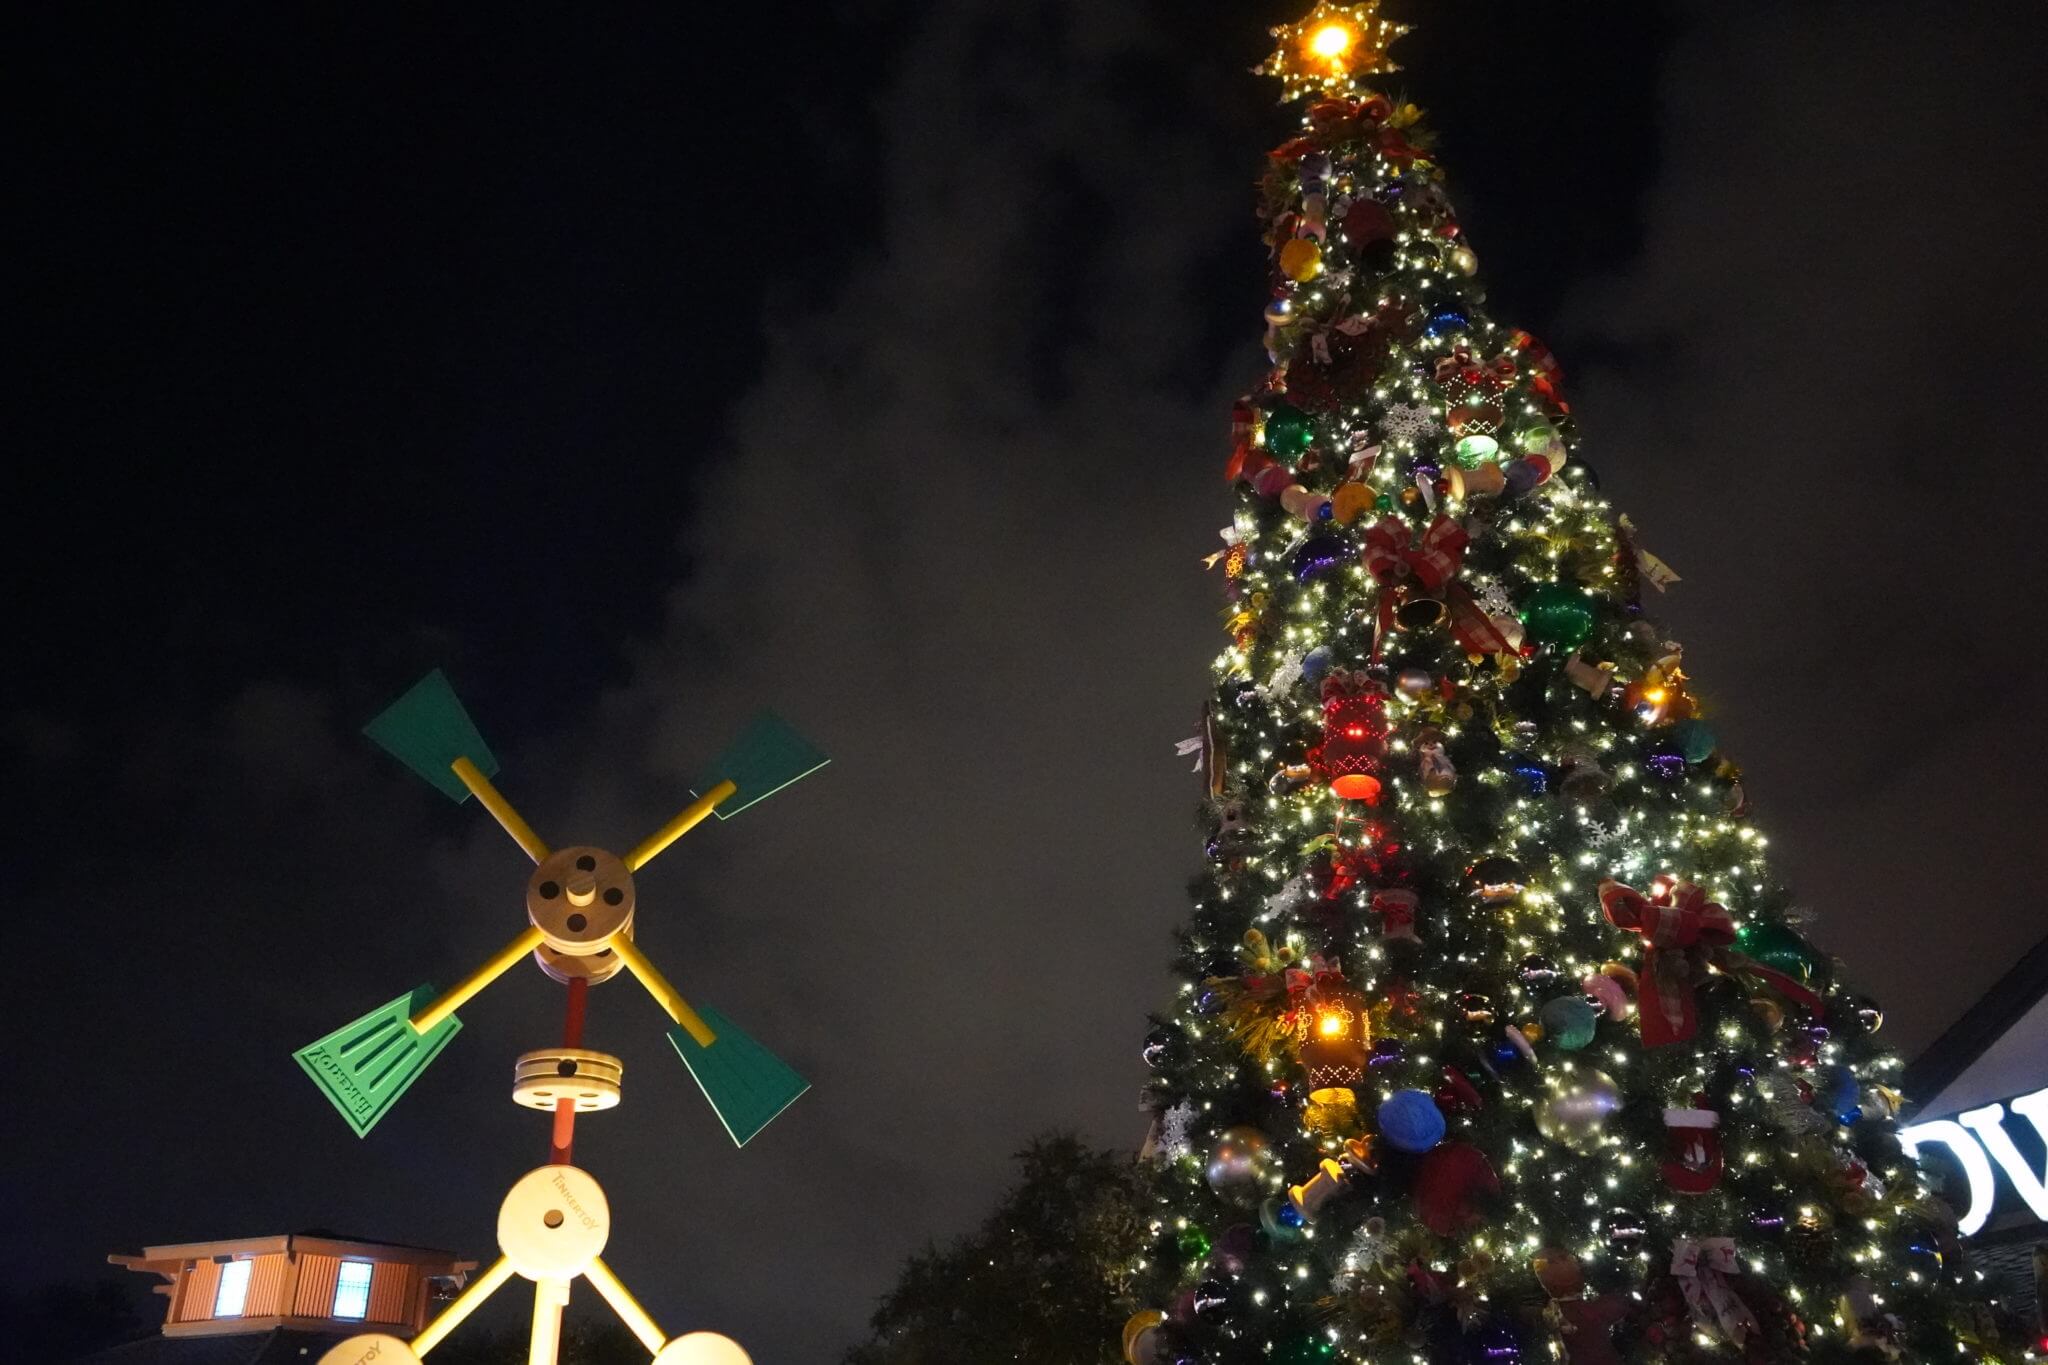 Christmas Tree and Once Upon a Toy at Disney Springs